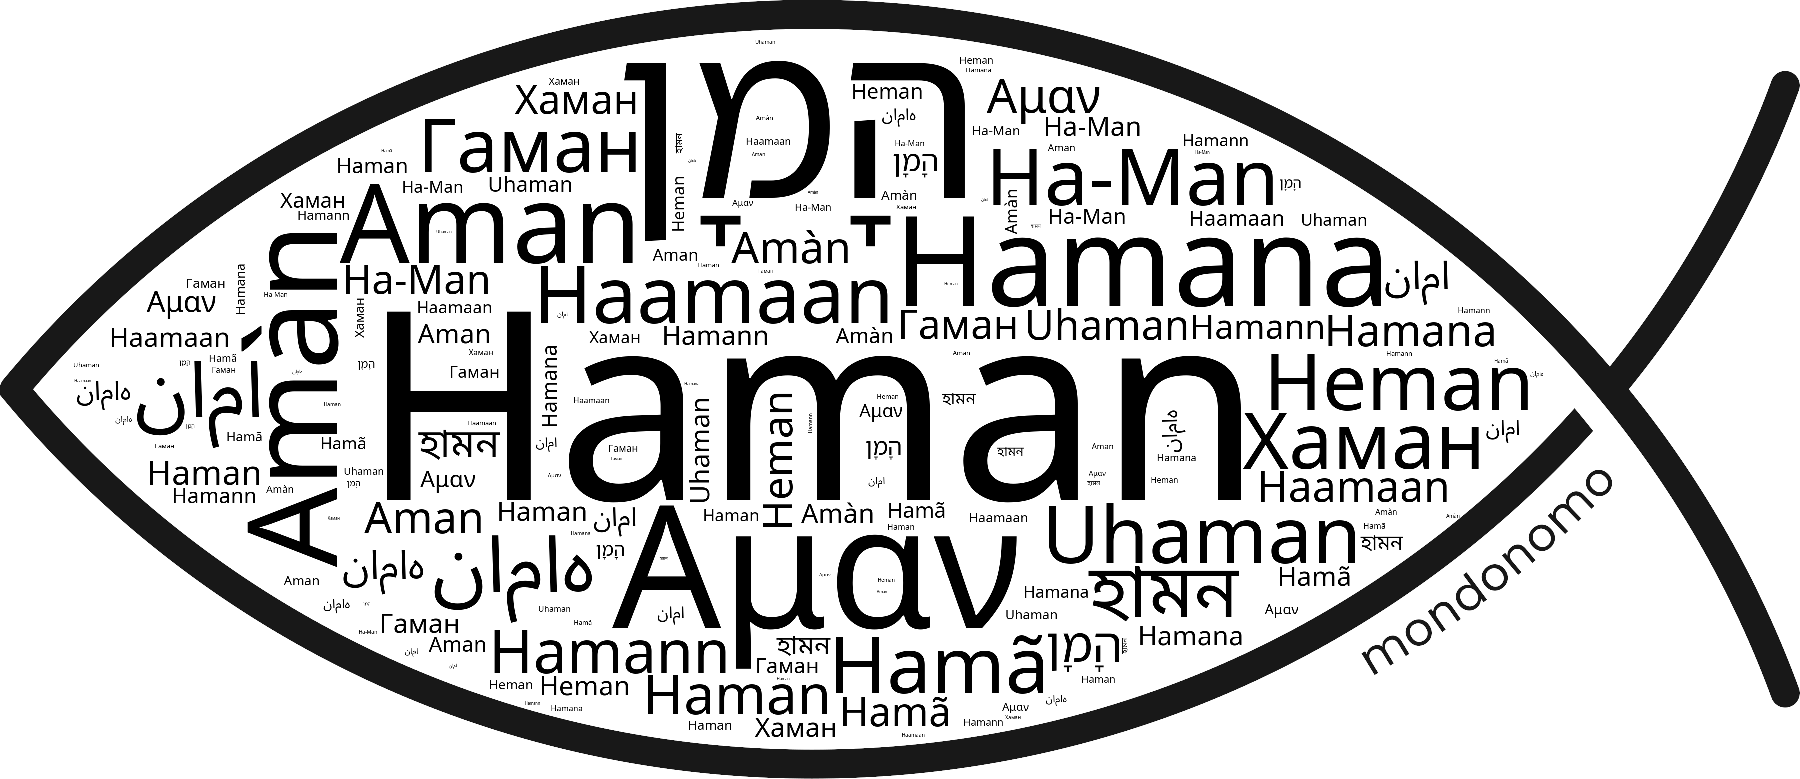 Name Haman in the world's Bibles